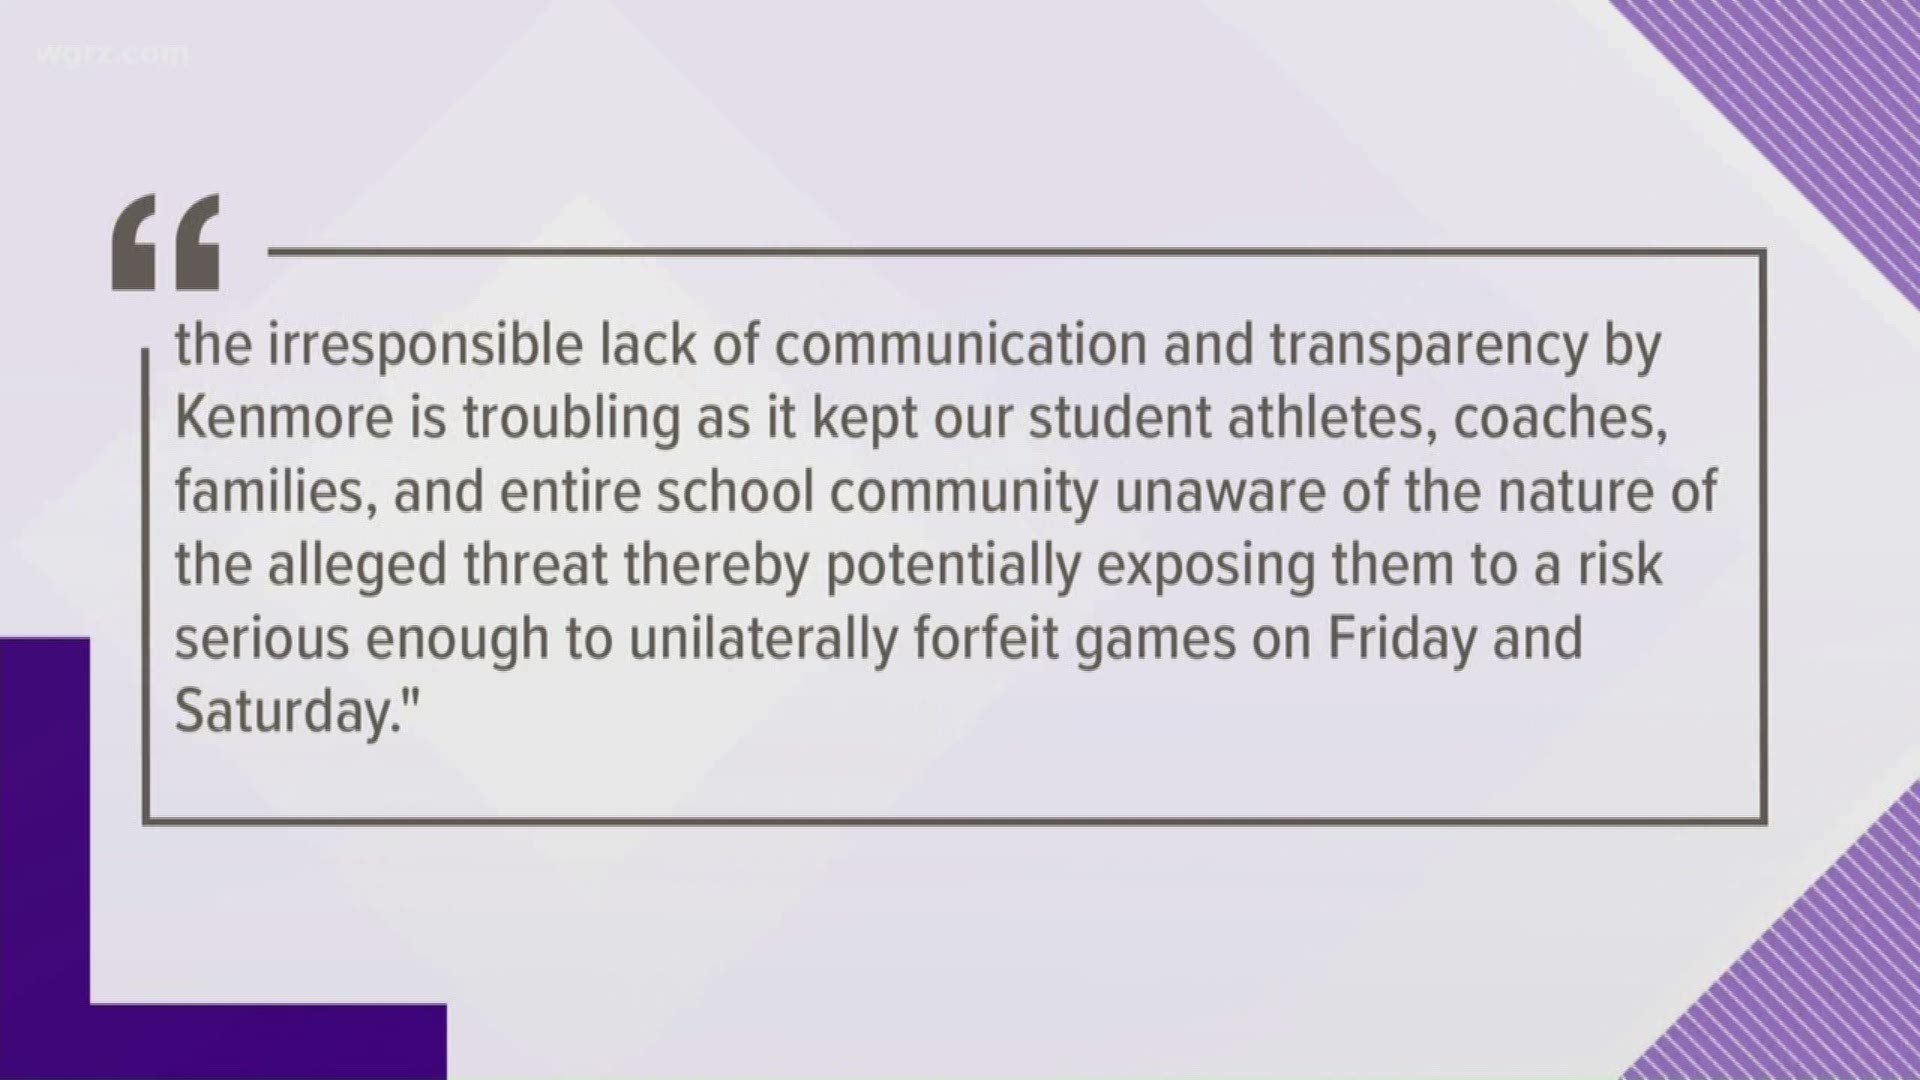 They say the idea that they unilaterally forfeited the game is false... and they're trying to reschedule it.